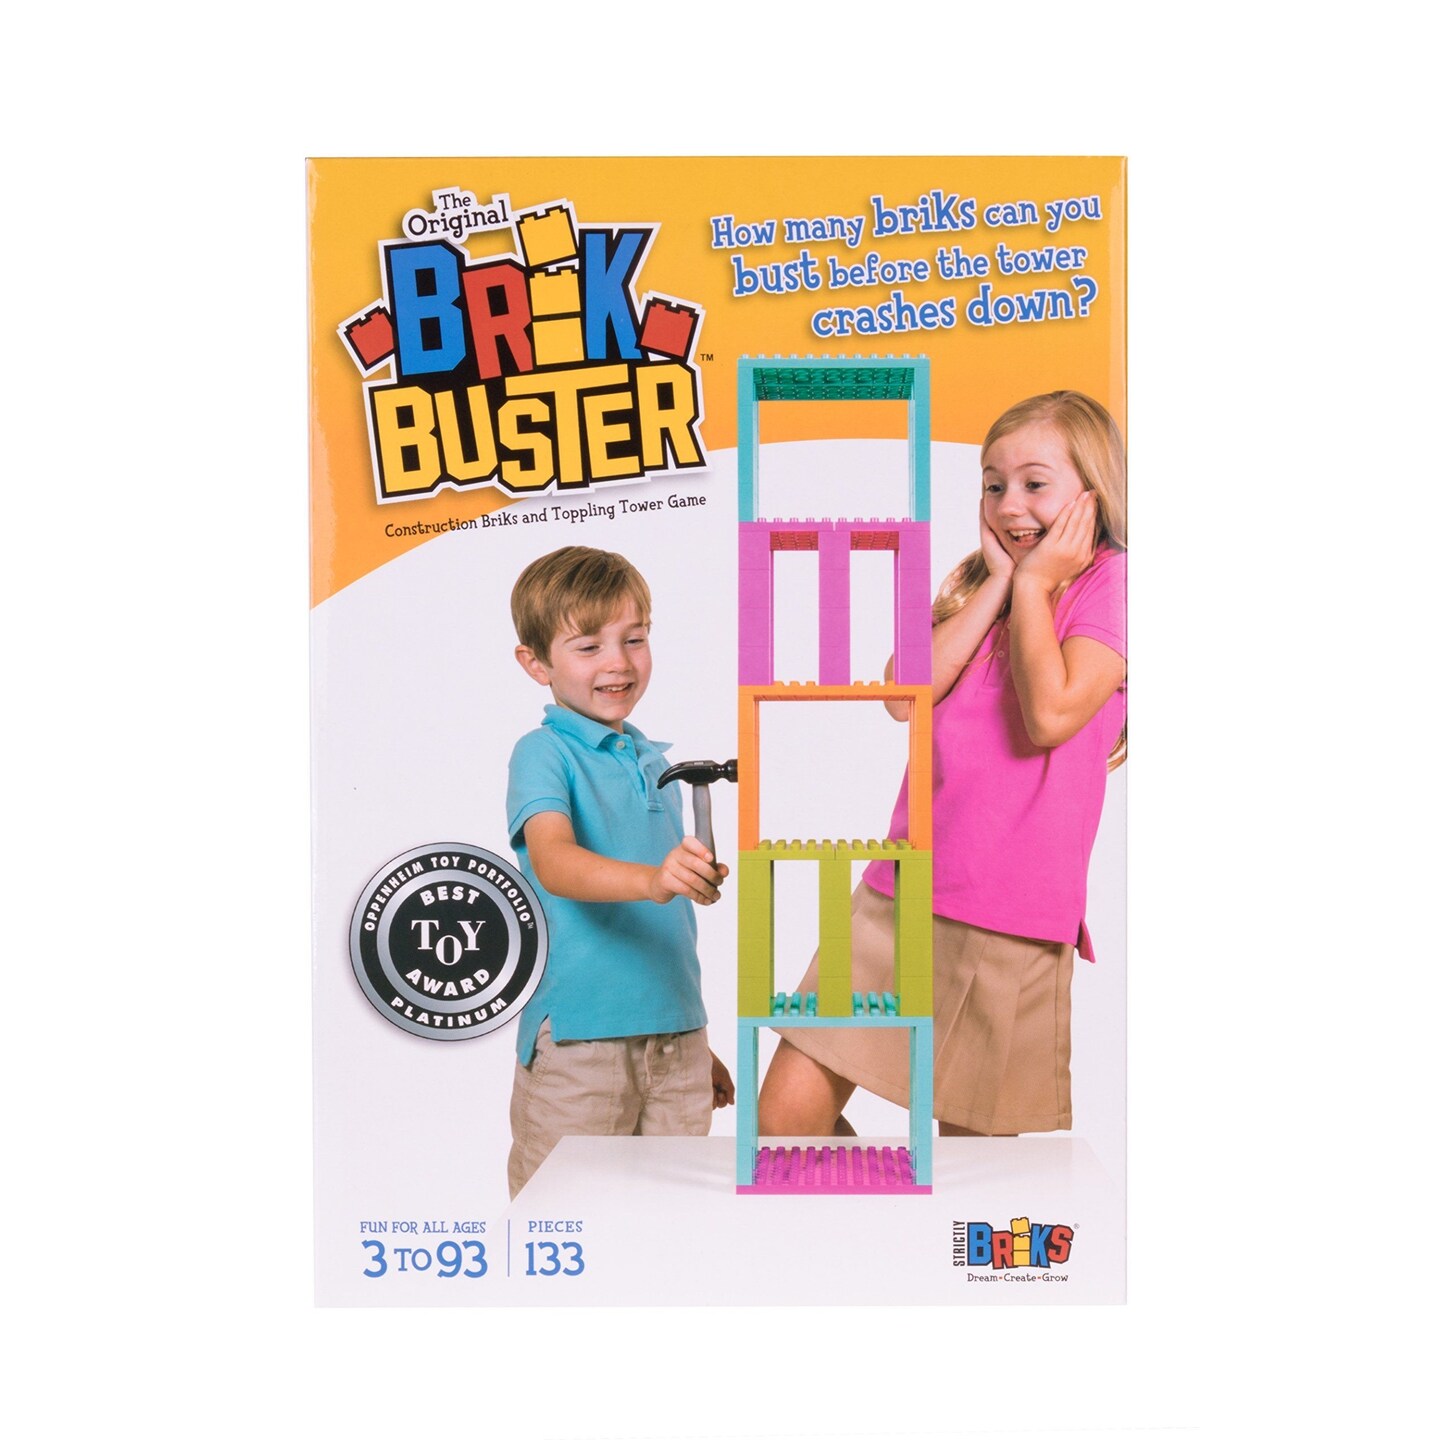 Strictly Briks Brik Buster, Construction Bricks and Toppling Tower Game, 133 Pieces, 100% Compatible with All Major Brick Brands, Fun for All Ages 3+, Award Winning Game Created by Kids for Kids